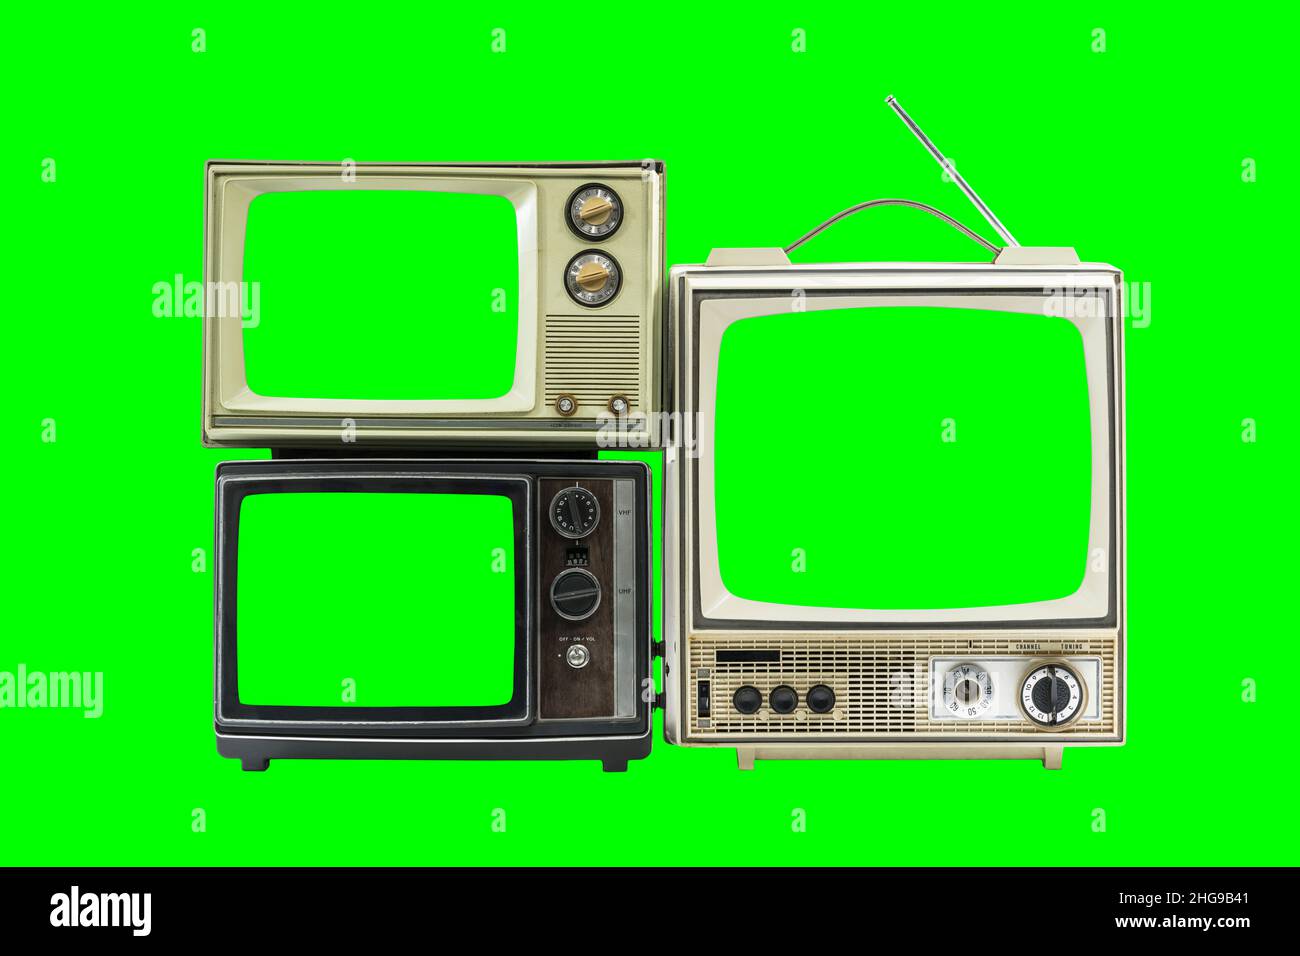 Three vintage televisions isolated with chroma key green screens and background. Stock Photo